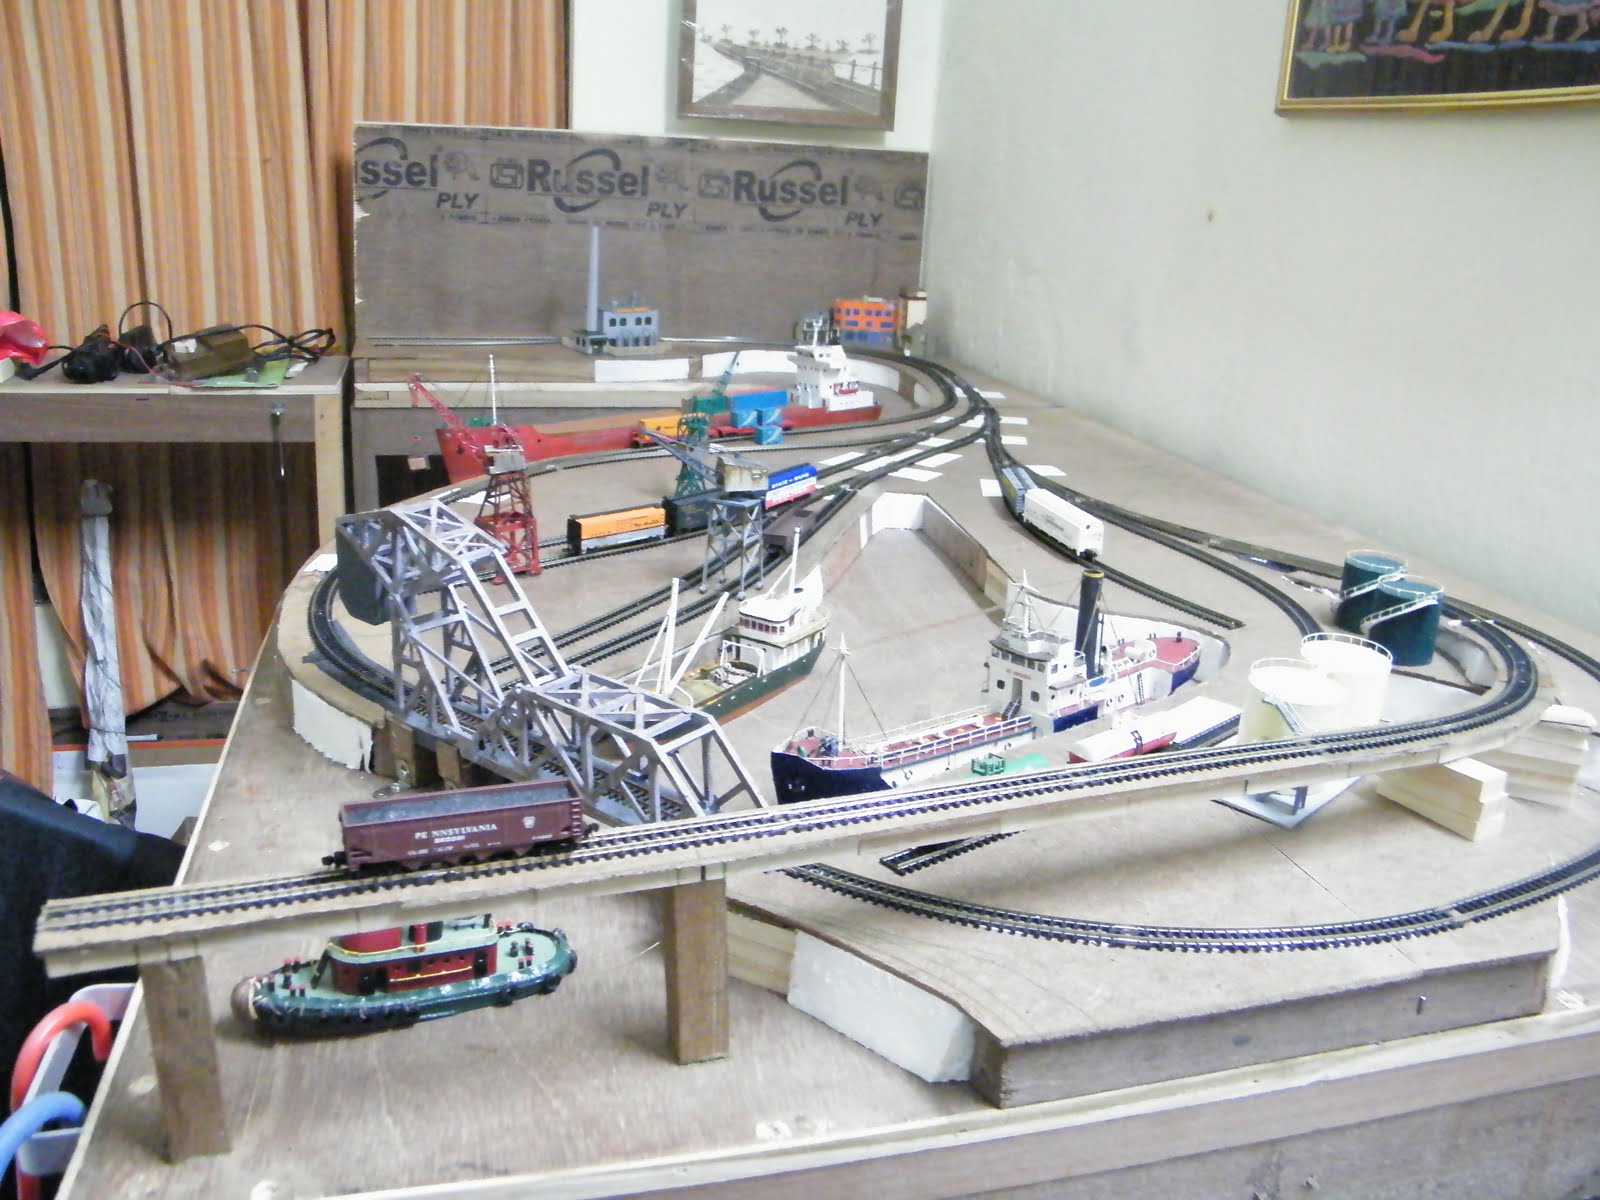  for the turnout in Model Train Stuff and waiting for it to arrive